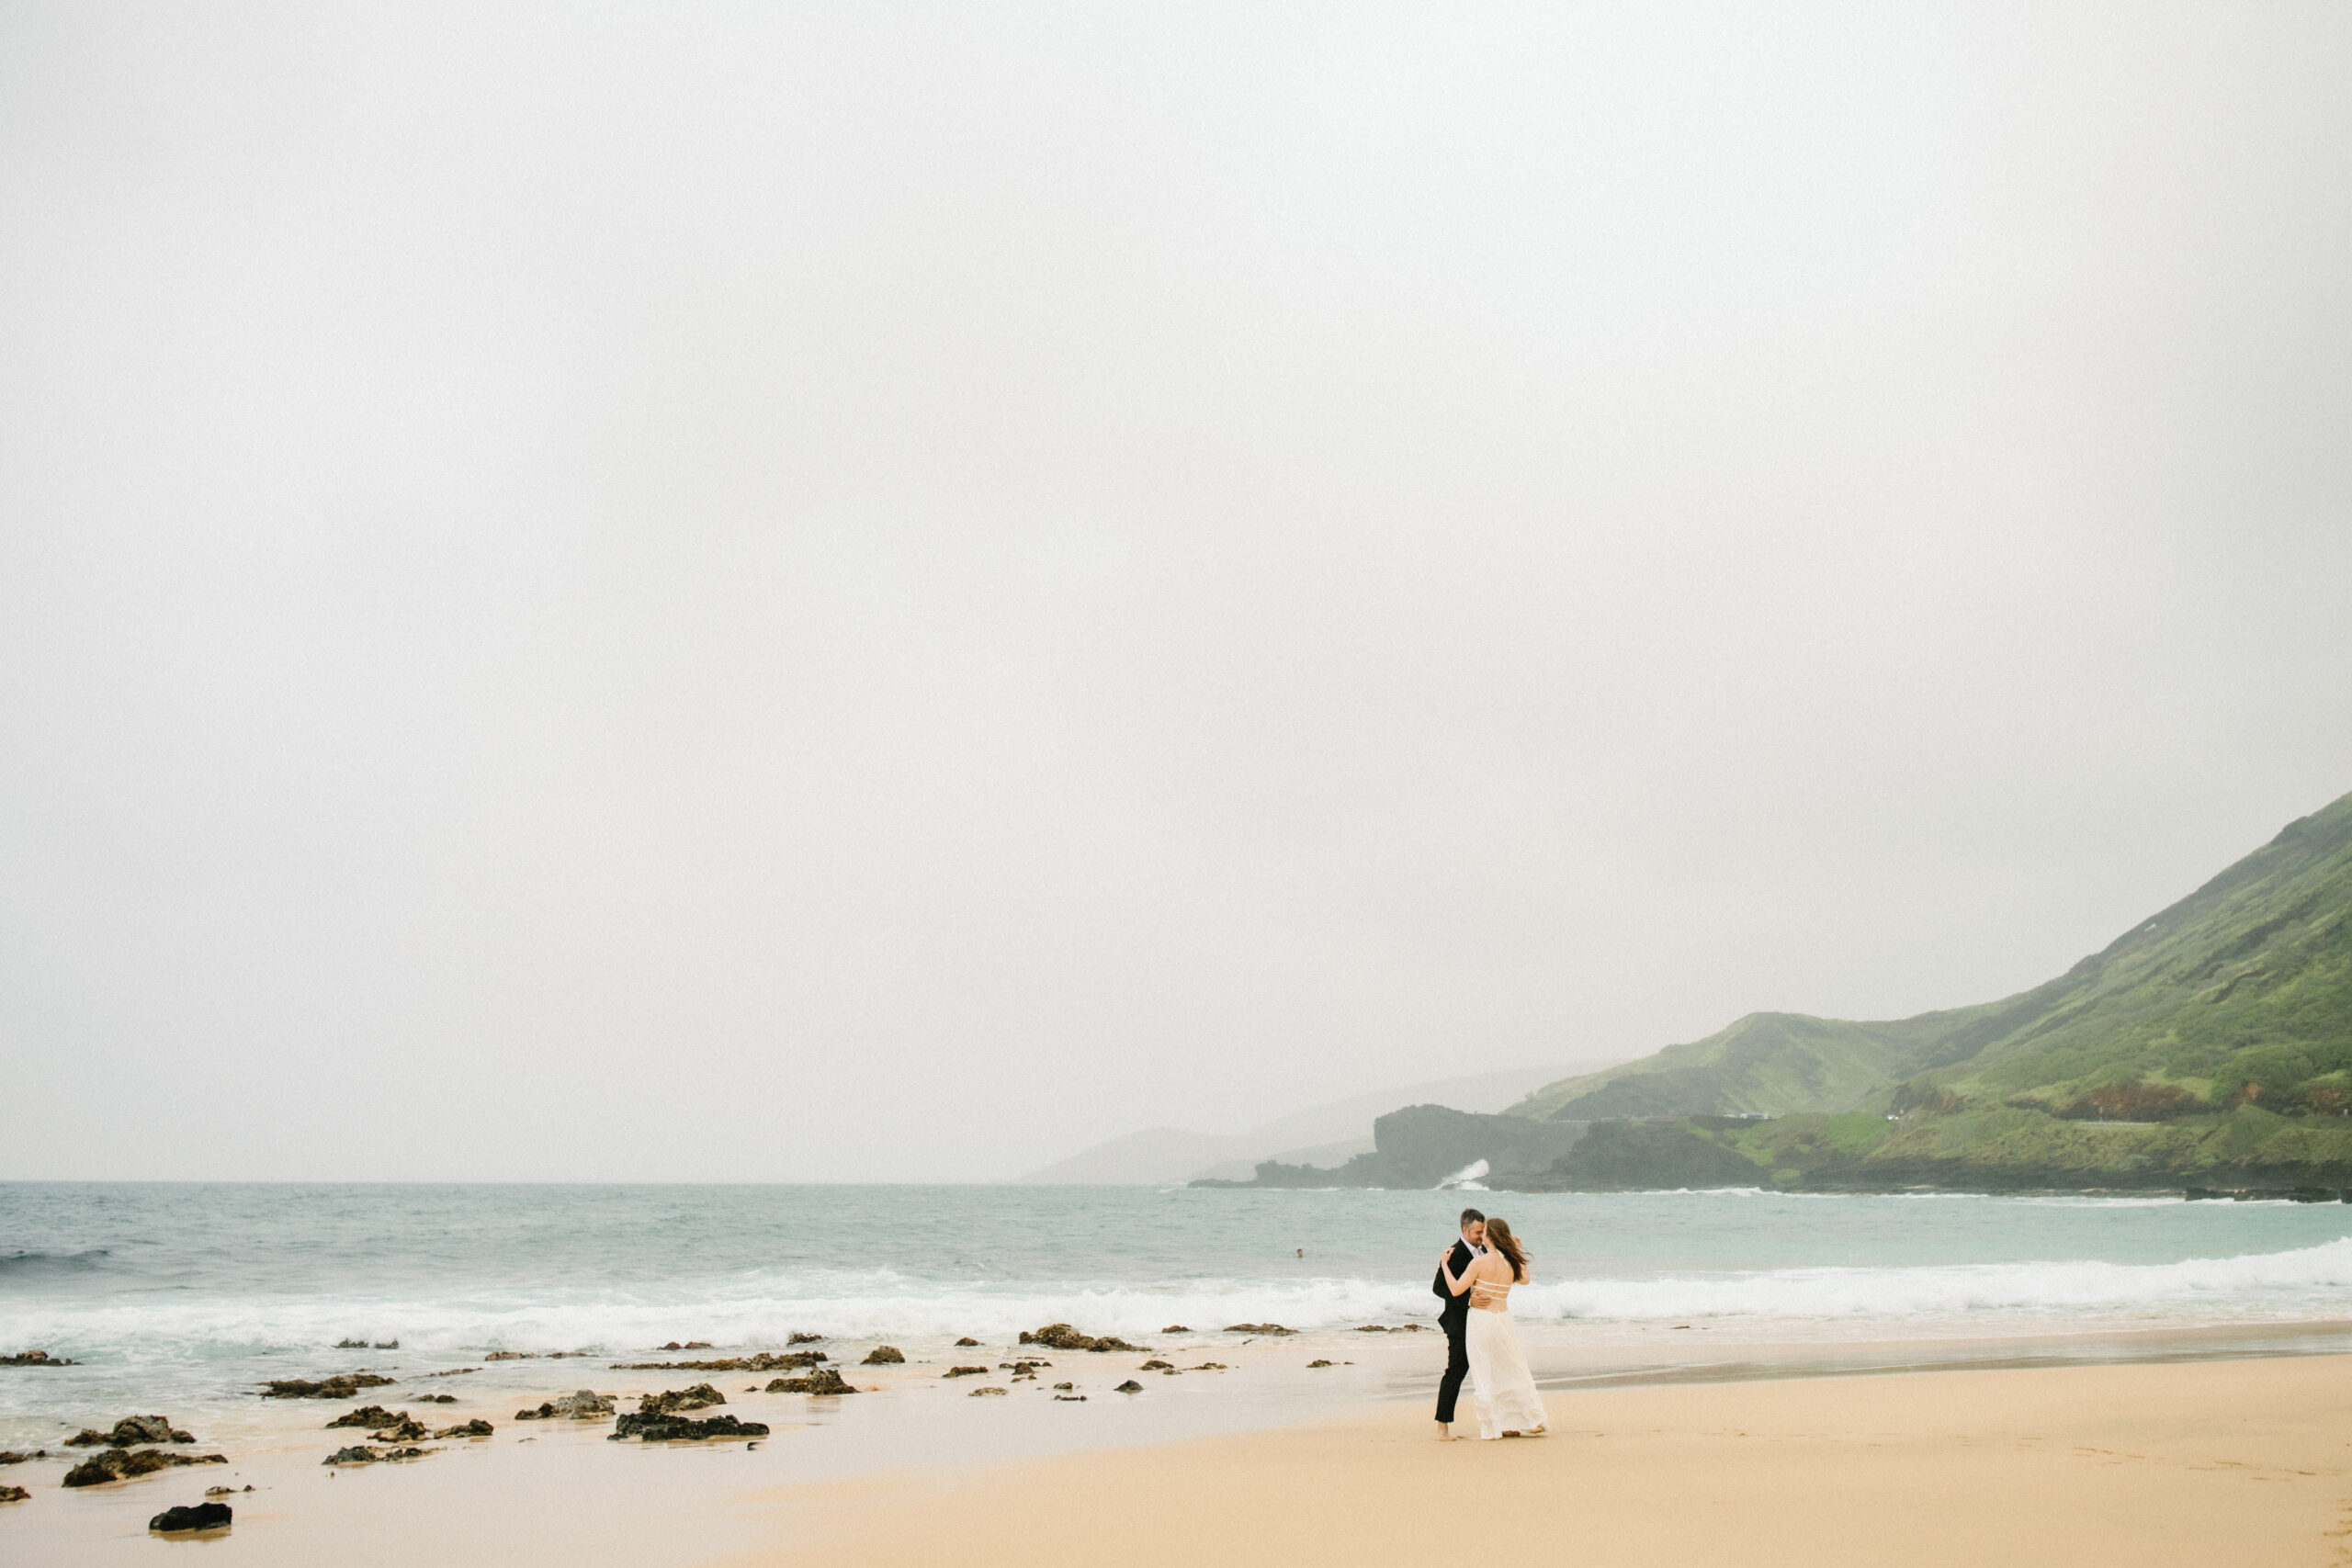 oahu beach brandon and vao couples photography annie groves 13 scaled